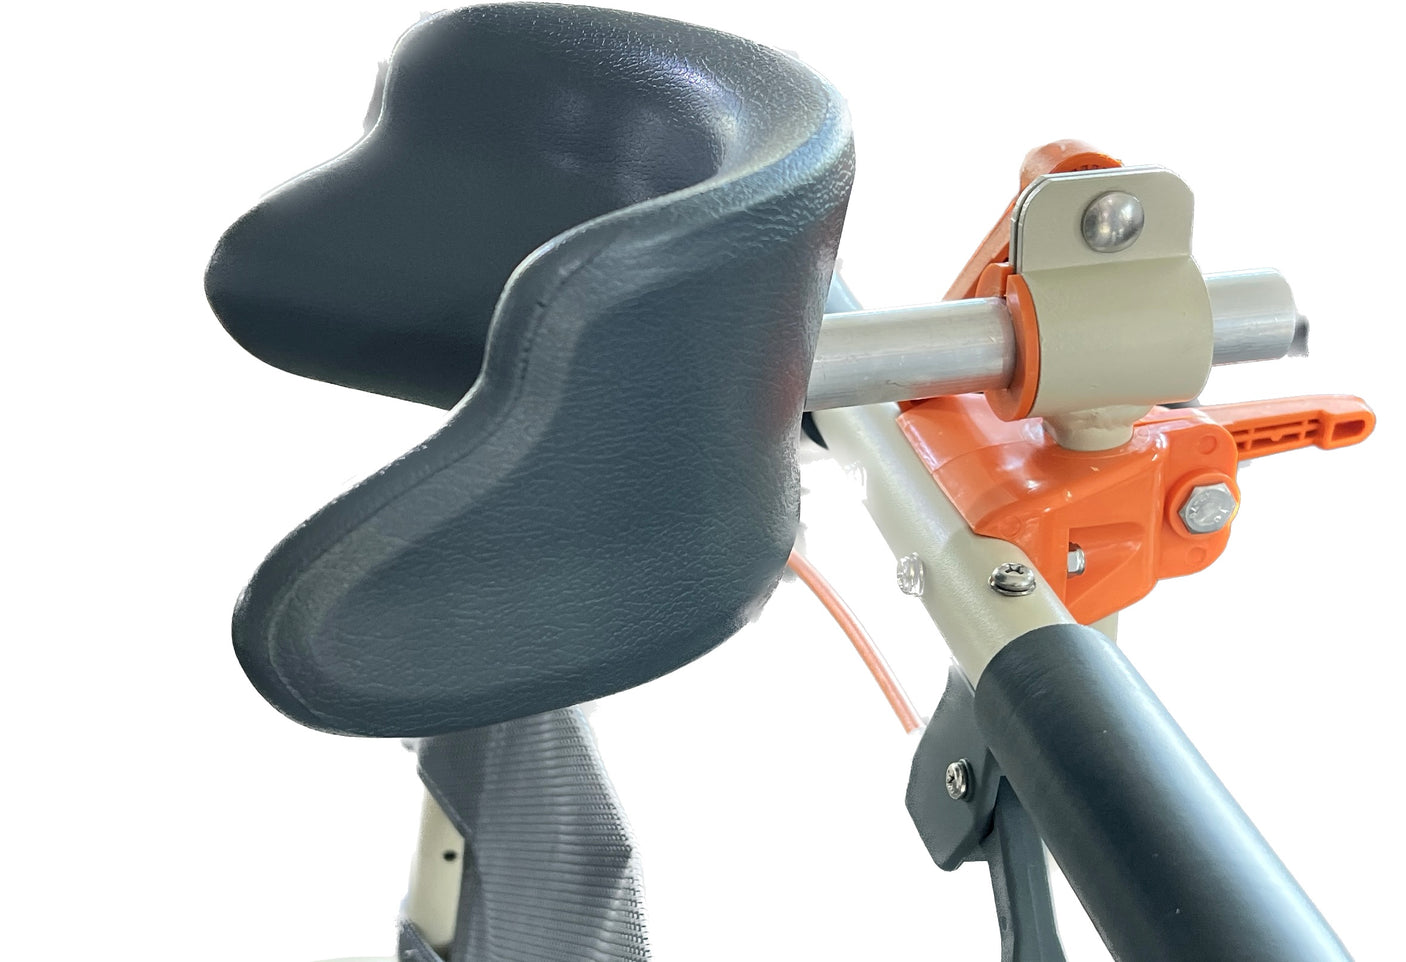 Close-up of a mobility aid chair headrest in navy blue with ergonomic contouring, mounted on a beige and orange frame with a silver adjustment lever, emphasizing comfort and support for the user's head and neck.